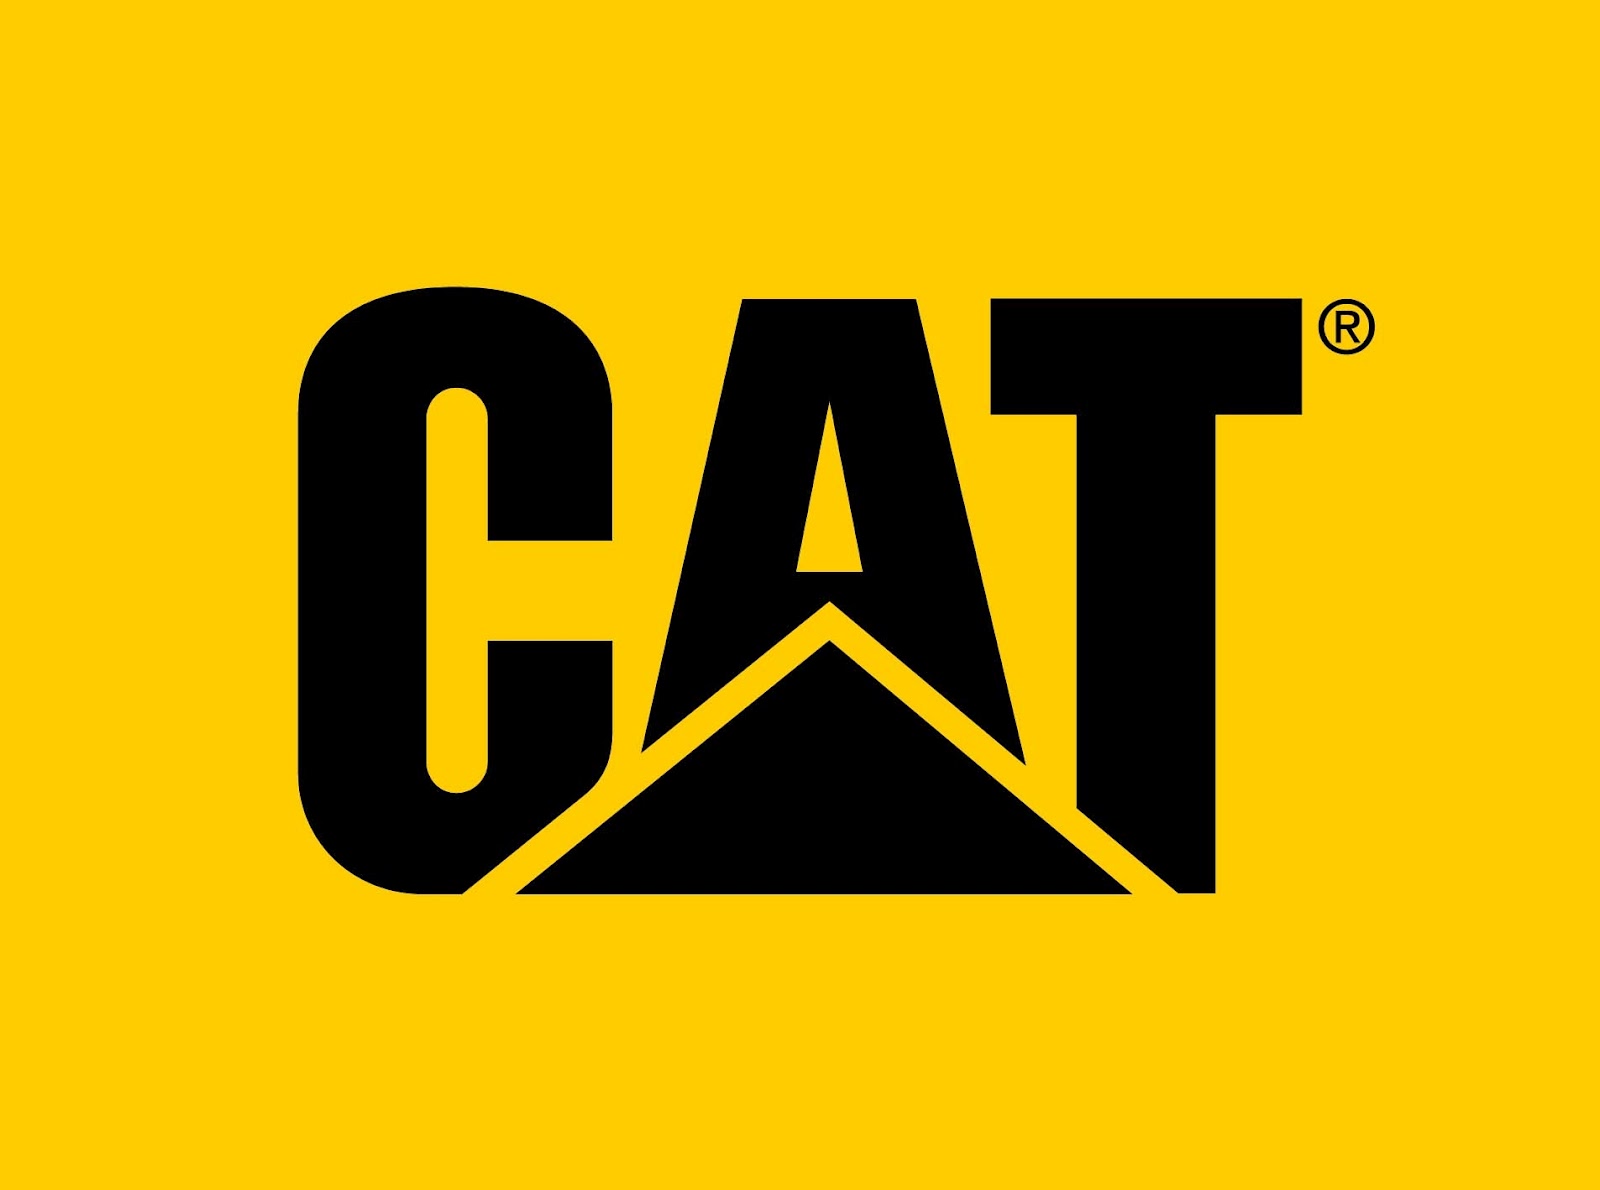 Everything About All Logos: Caterpillar Logo Pictures